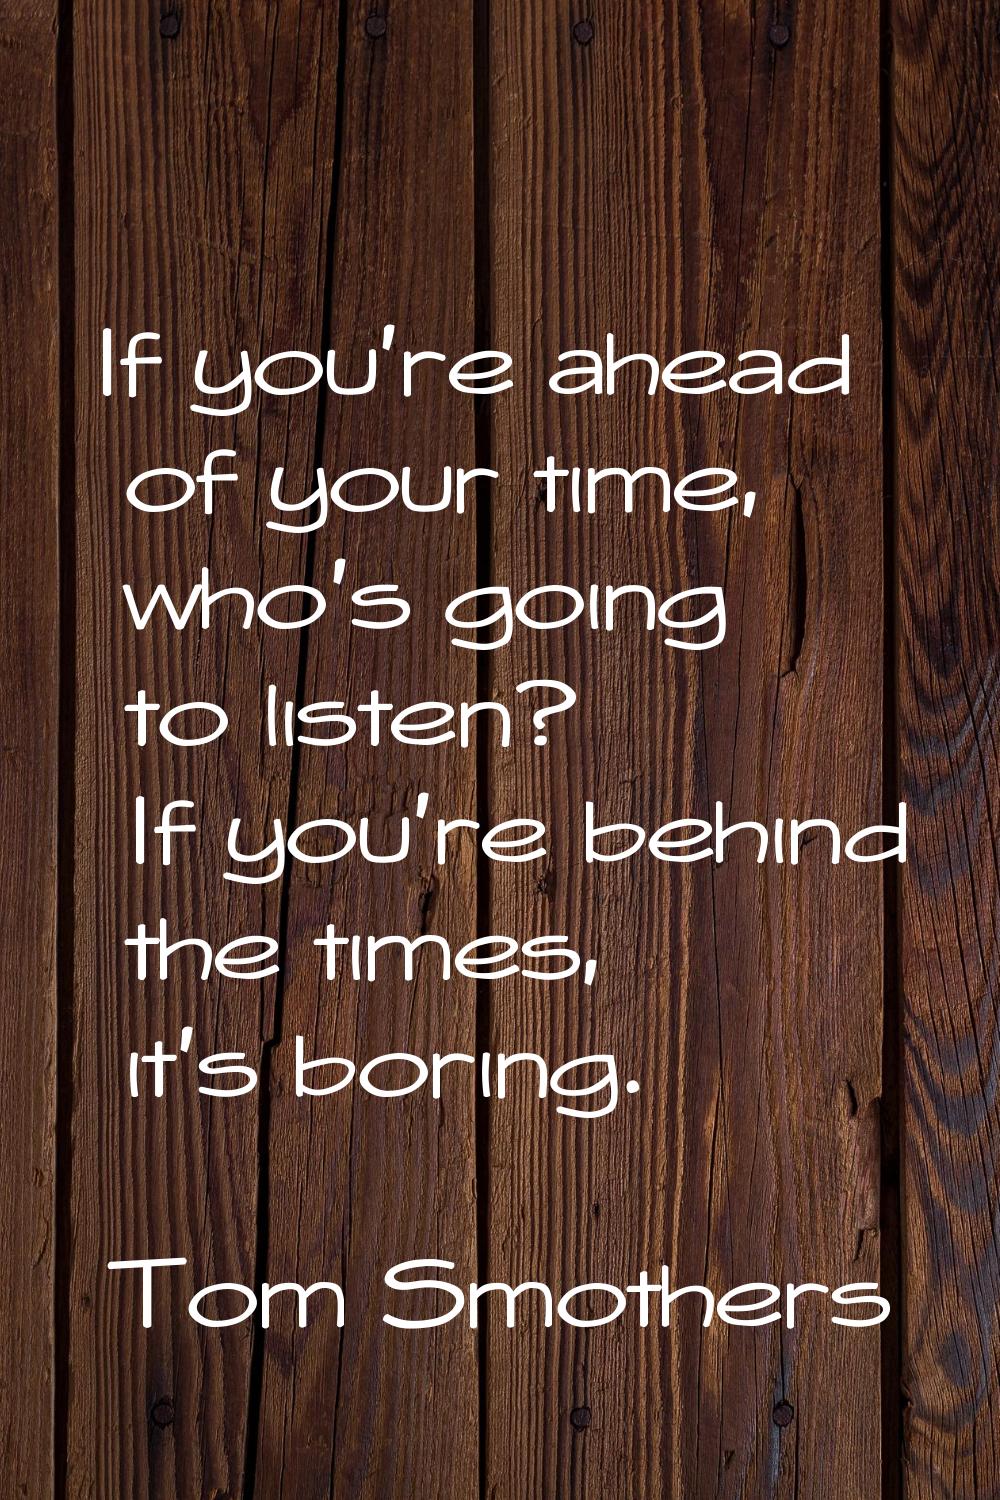 If you're ahead of your time, who's going to listen? If you're behind the times, it's boring.